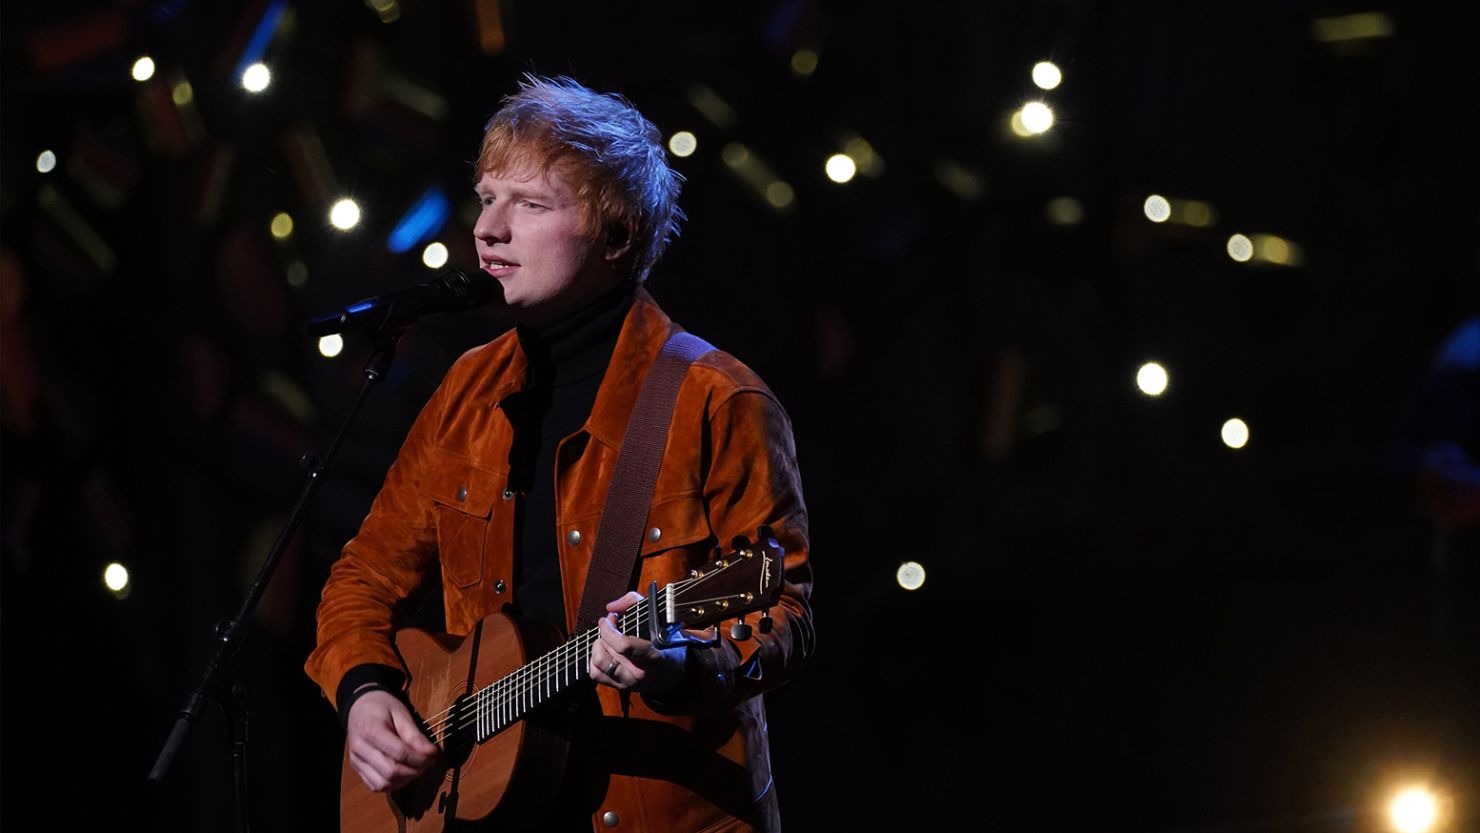 Ed Sheeran is opening up about his friendship with Elton John.